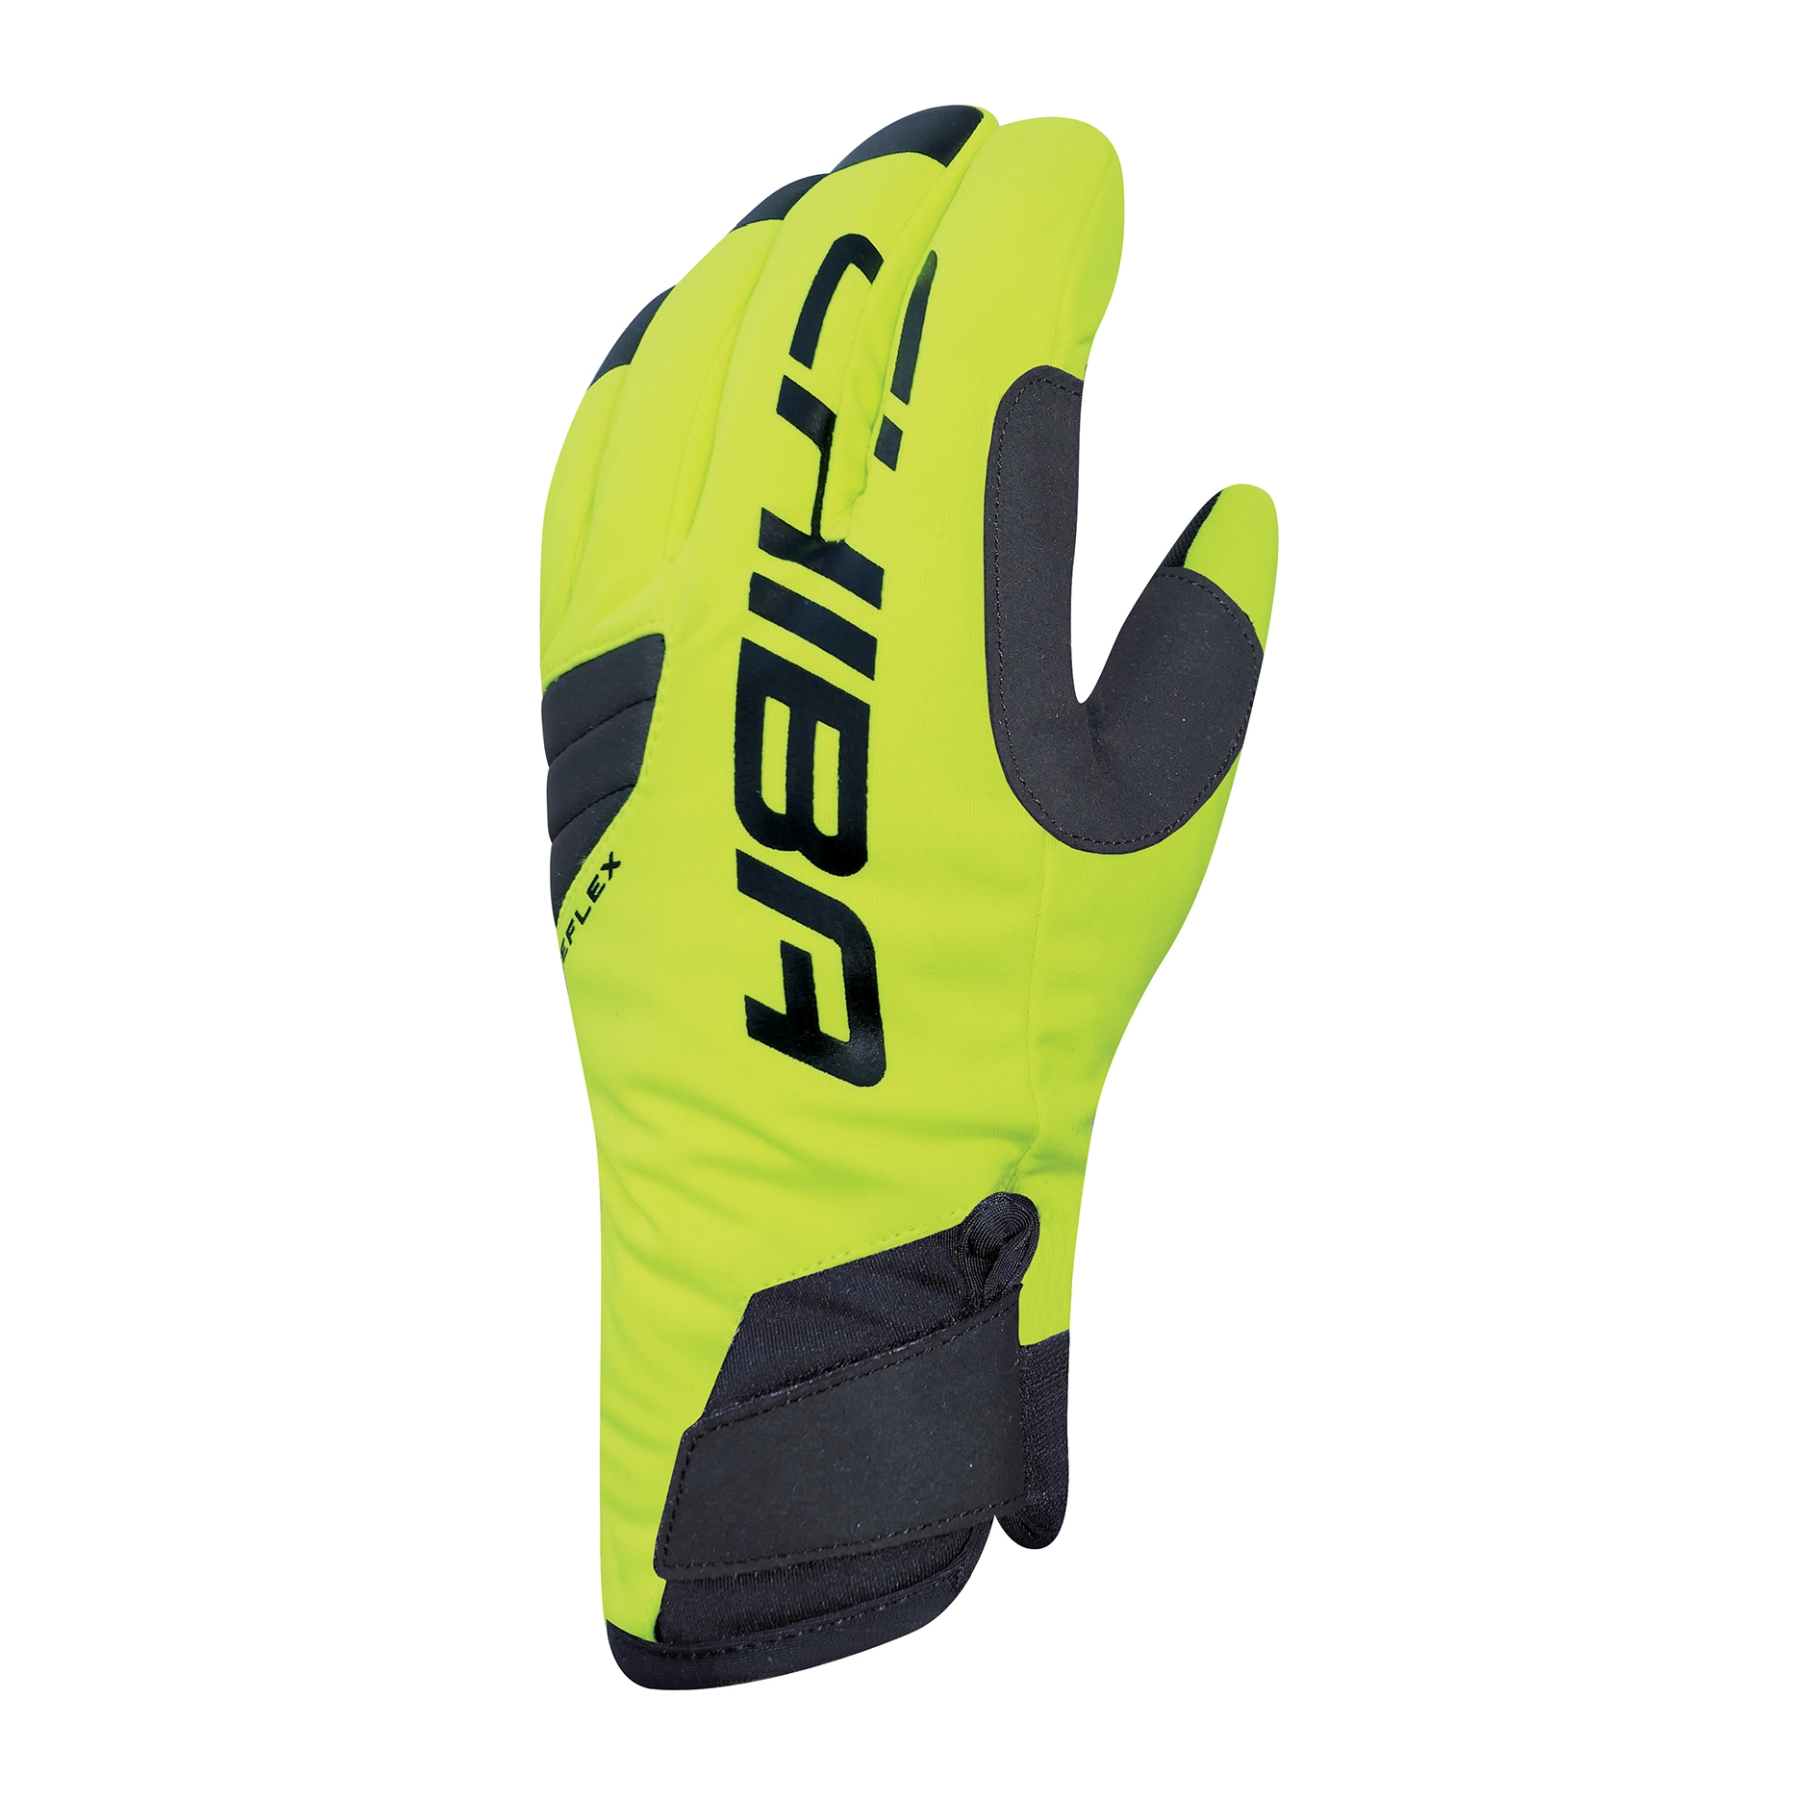 Picture of Chiba BioXCell Warm Winter Cycling Gloves - neon yellow 3160020